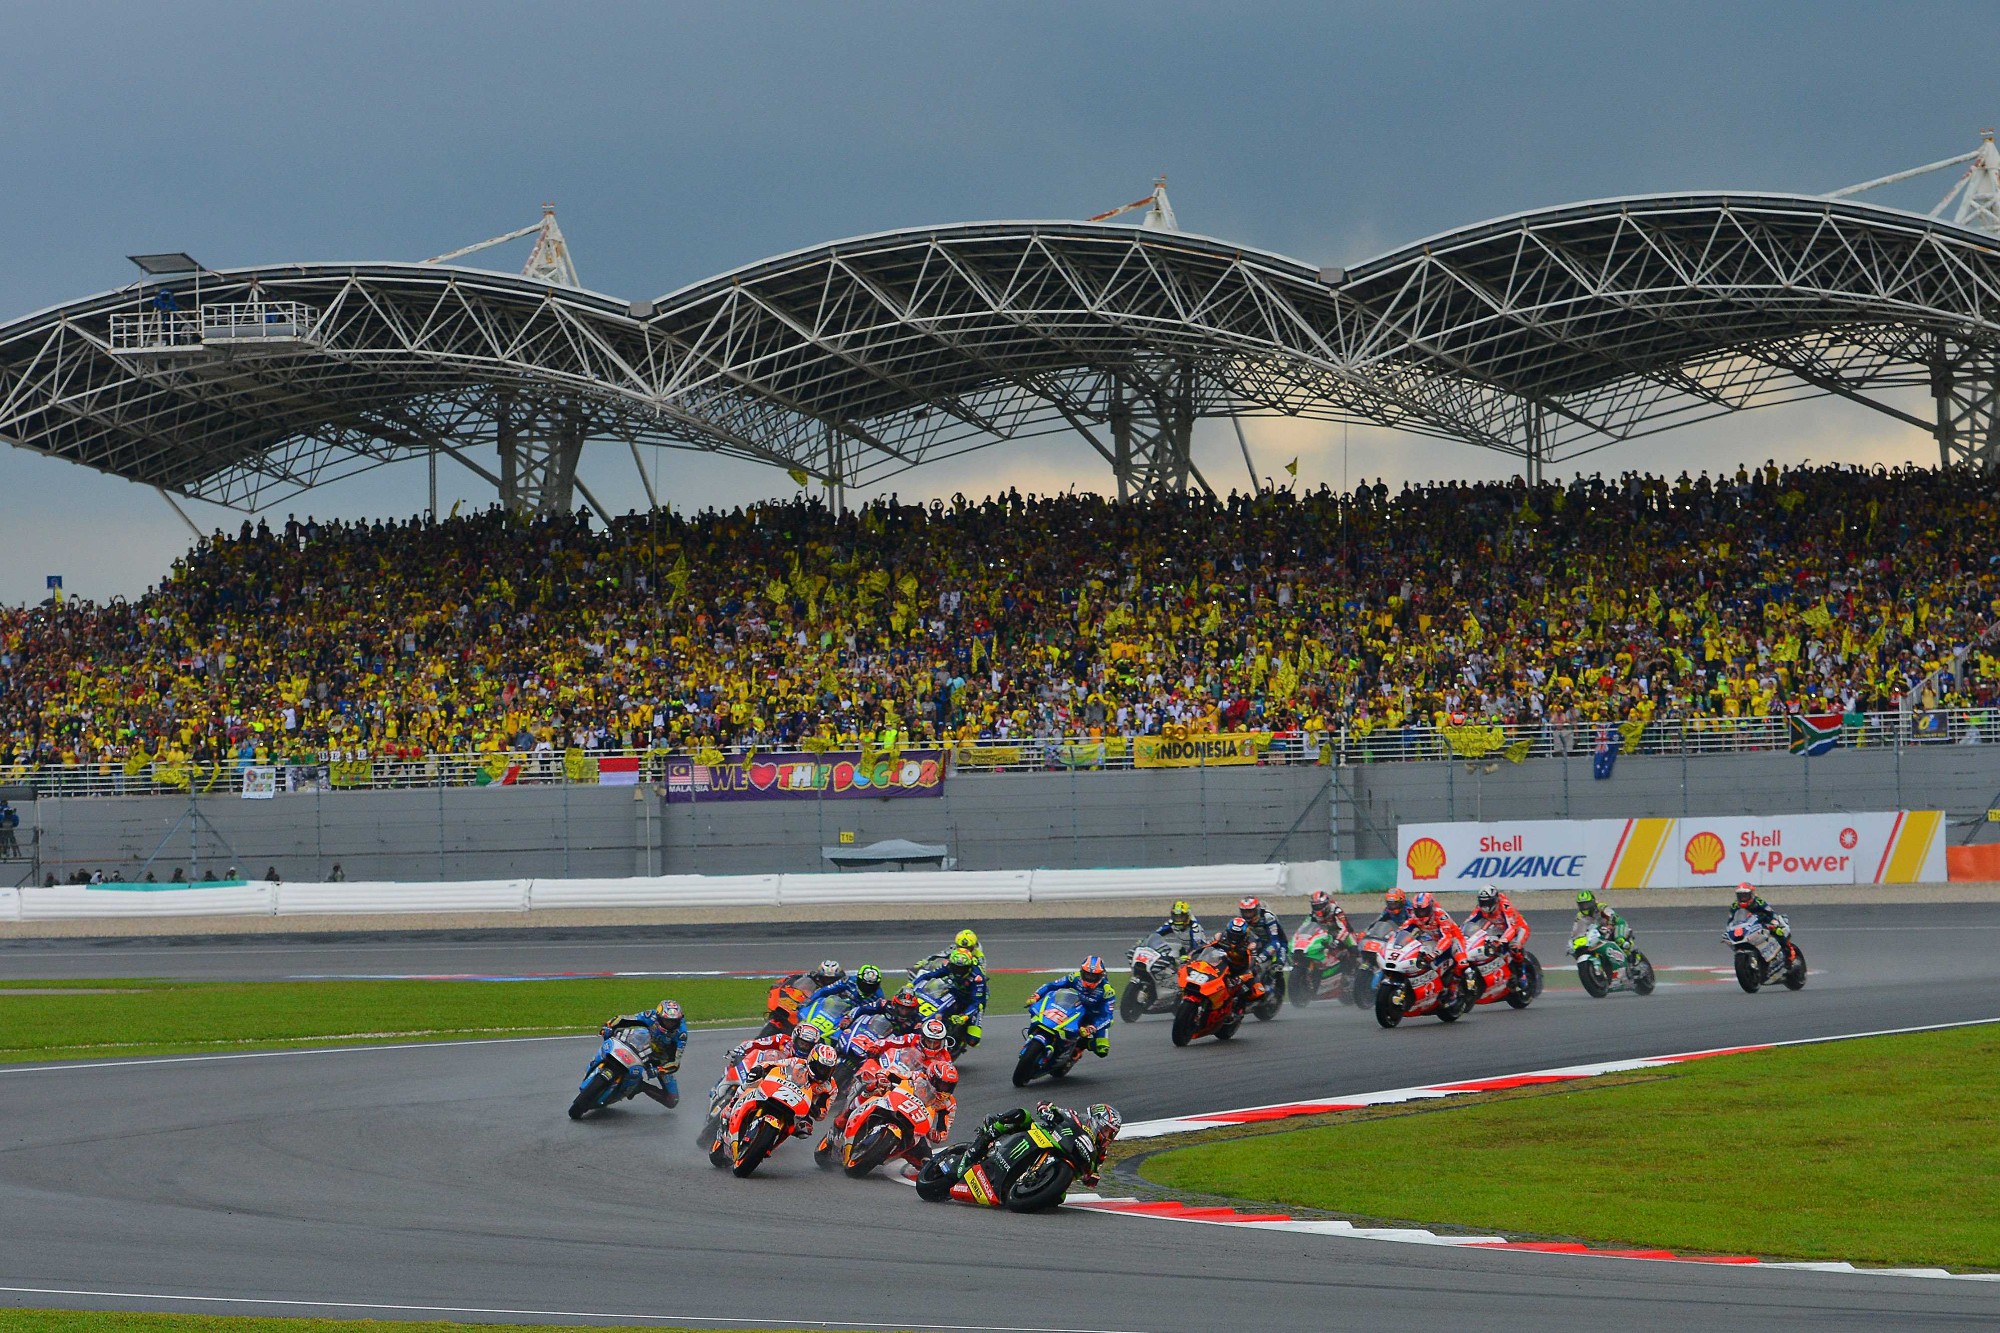 MotoGP beIN SPORTS Issues Broadcast Schedule For The Malaysian Grand Prix 